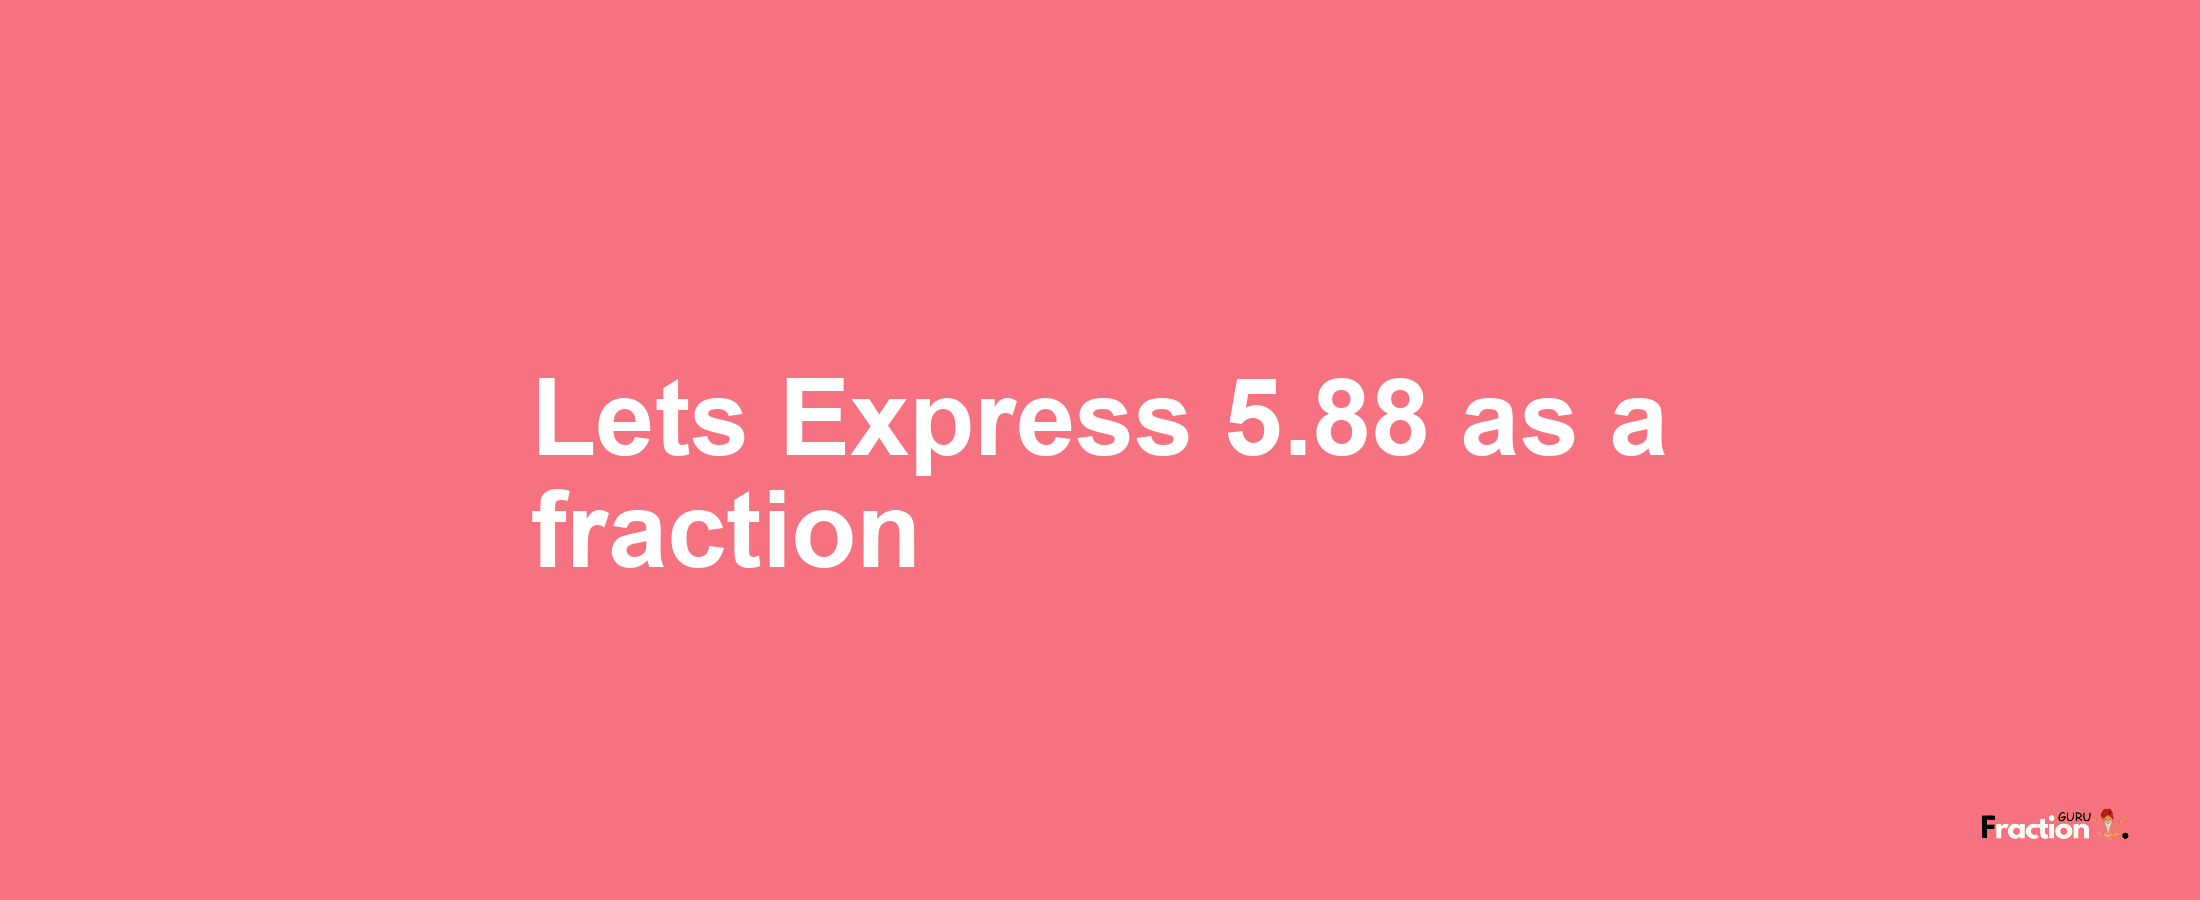 Lets Express 5.88 as afraction